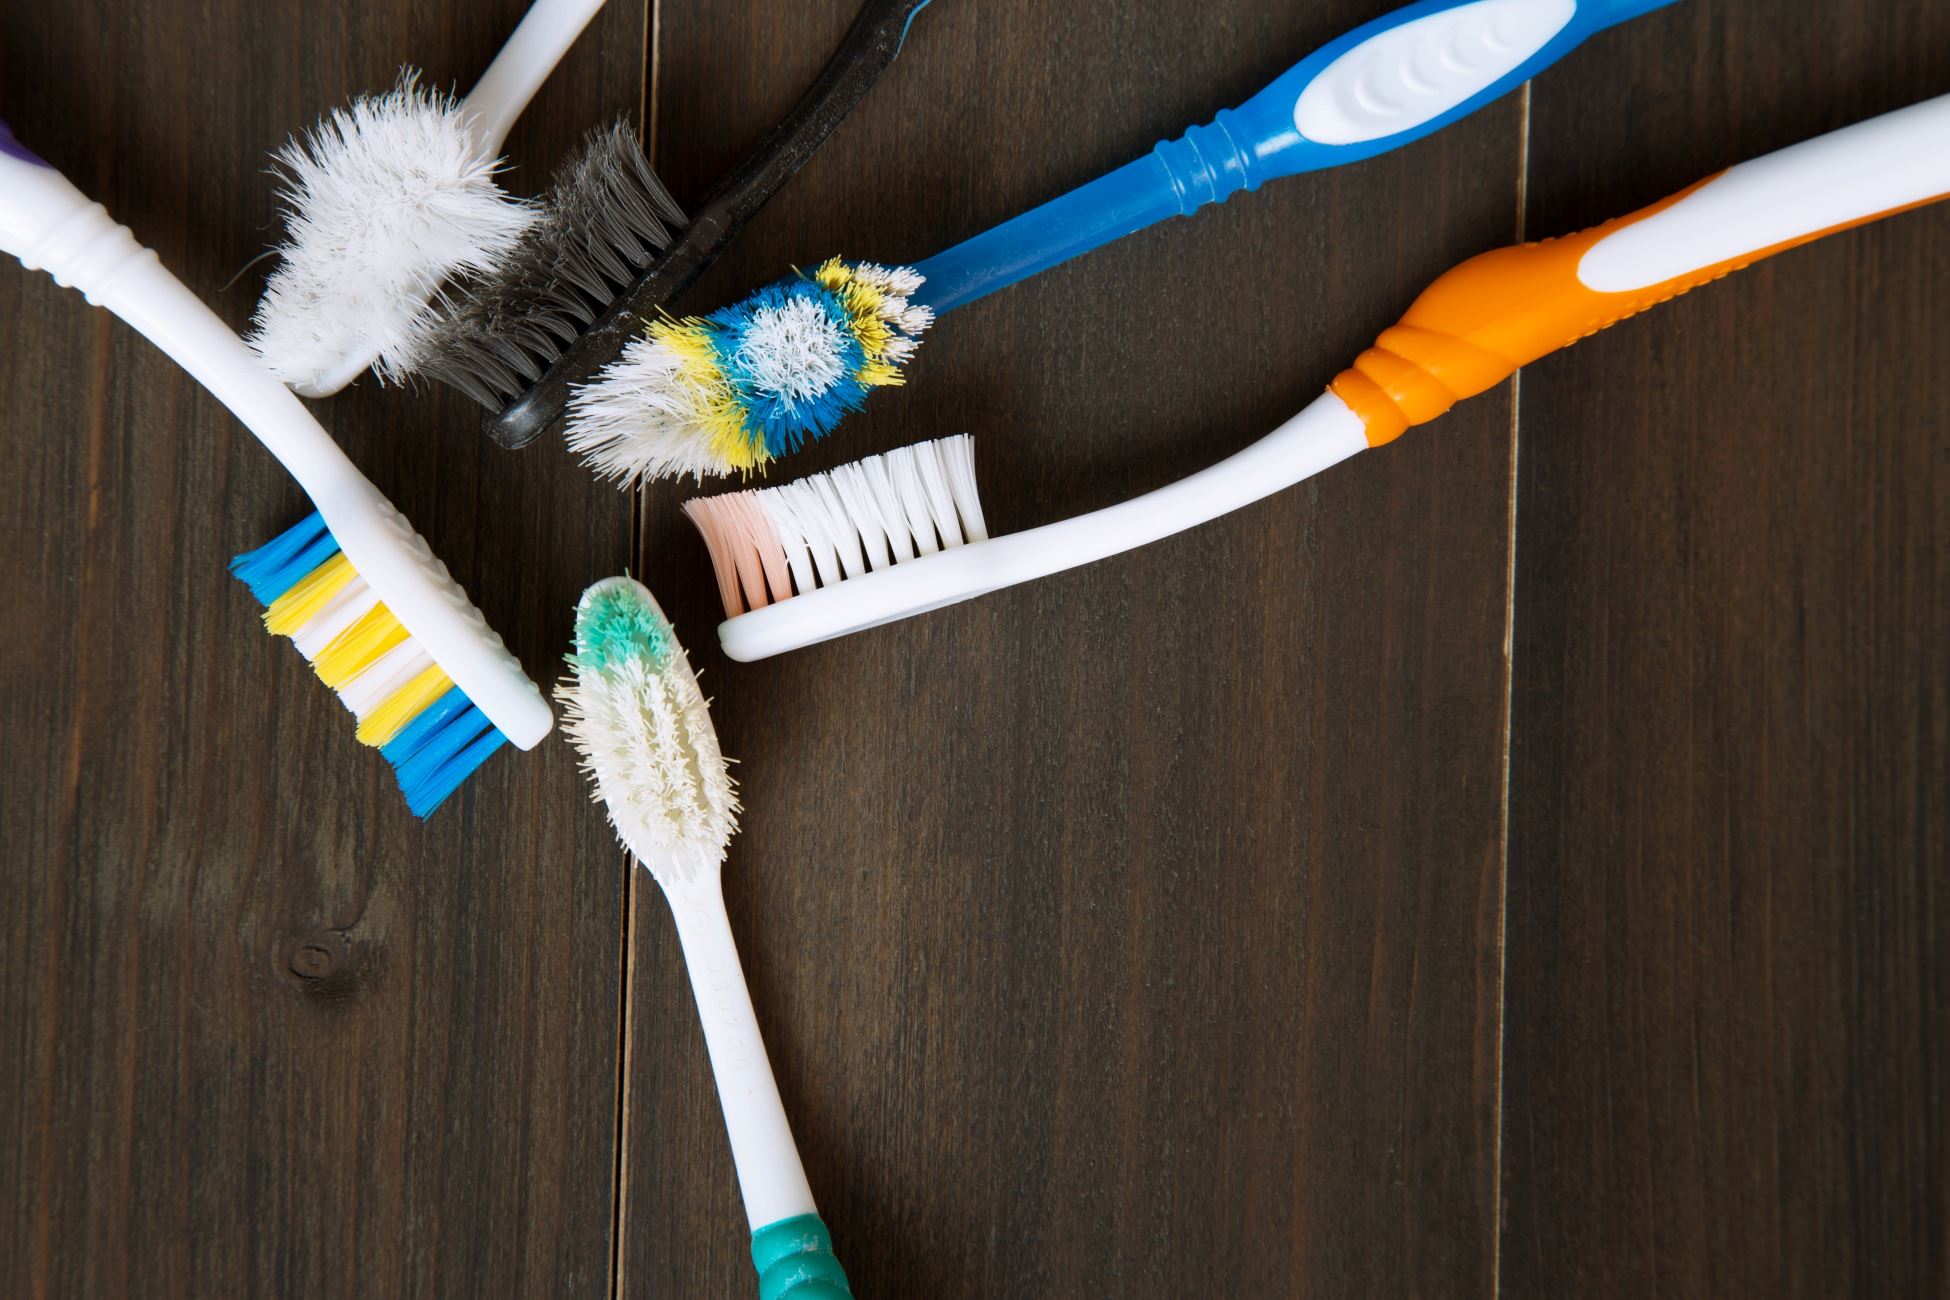 How Long Should You Use A Toothbrush